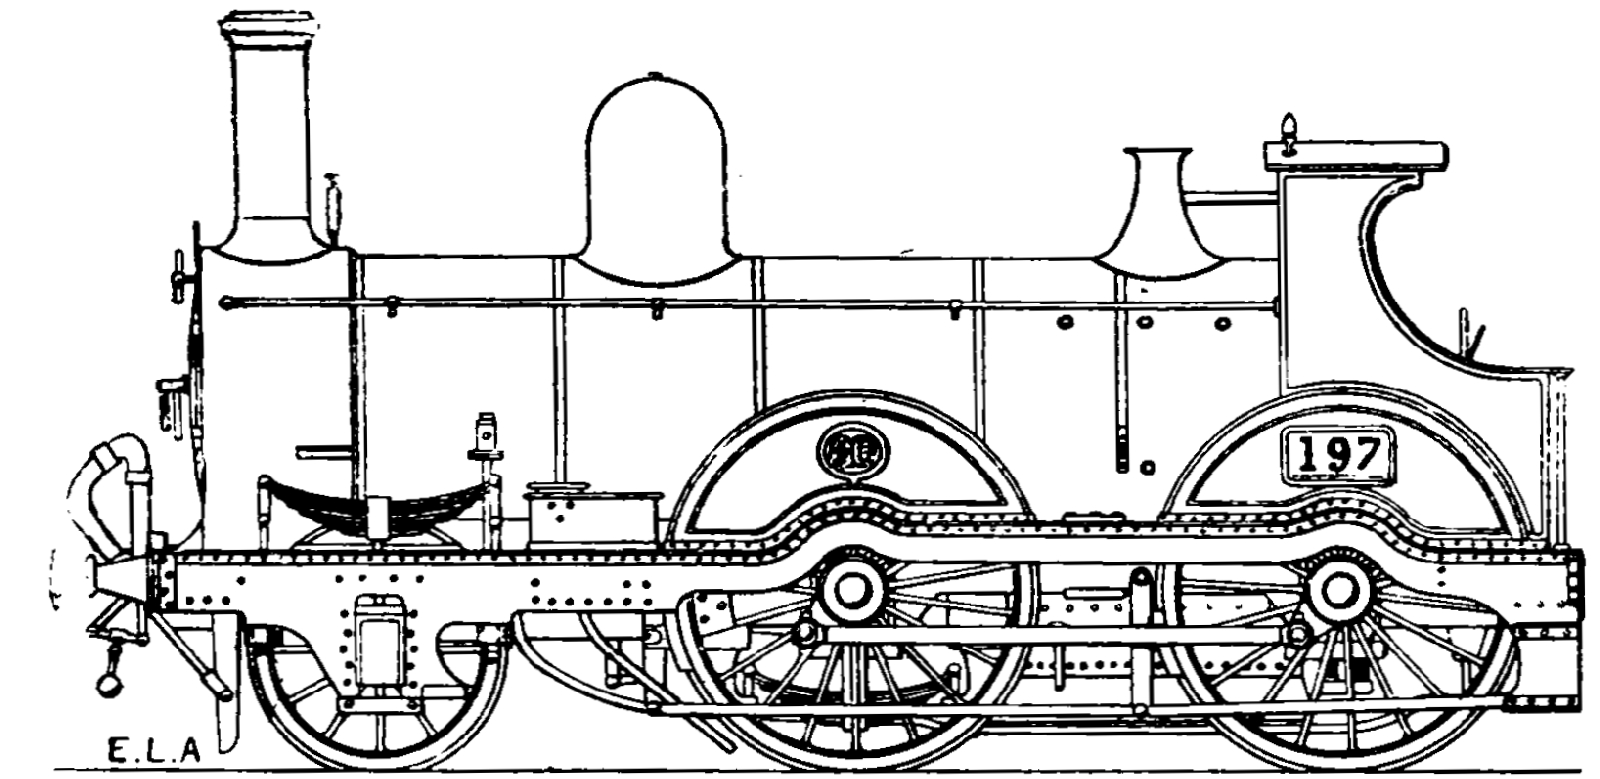 No. 197 after the renewed rebuild to a tender locomotive